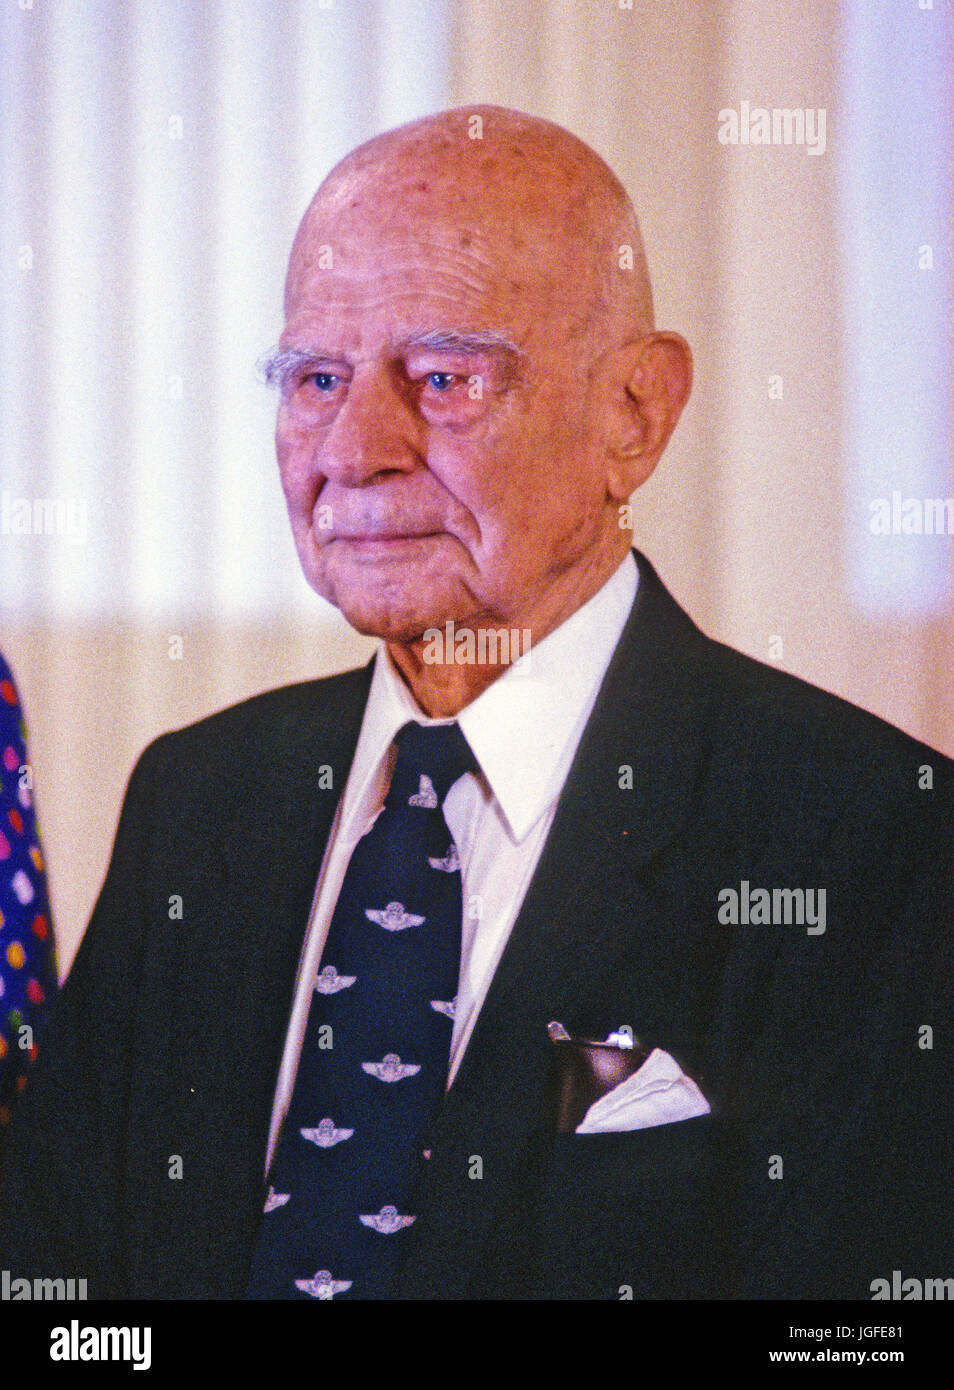 United States Air Force General Jimmy Doolittle is pictured during the ceremony where he is awarded the Presidential Medal of Freedom, the highest civilian award of the US, by US President George H.W. Bush and first lady Barbara Bush in the East Room of the White House in Washington, DC on July 6, 1989.  Doolittle was known for his development of instrument flying and for leading a 1942 air raid on Tokyo, Japan, for which he received the Medal of Honor. Credit: Ron Sachs / CNP /MediaPunch Stock Photo